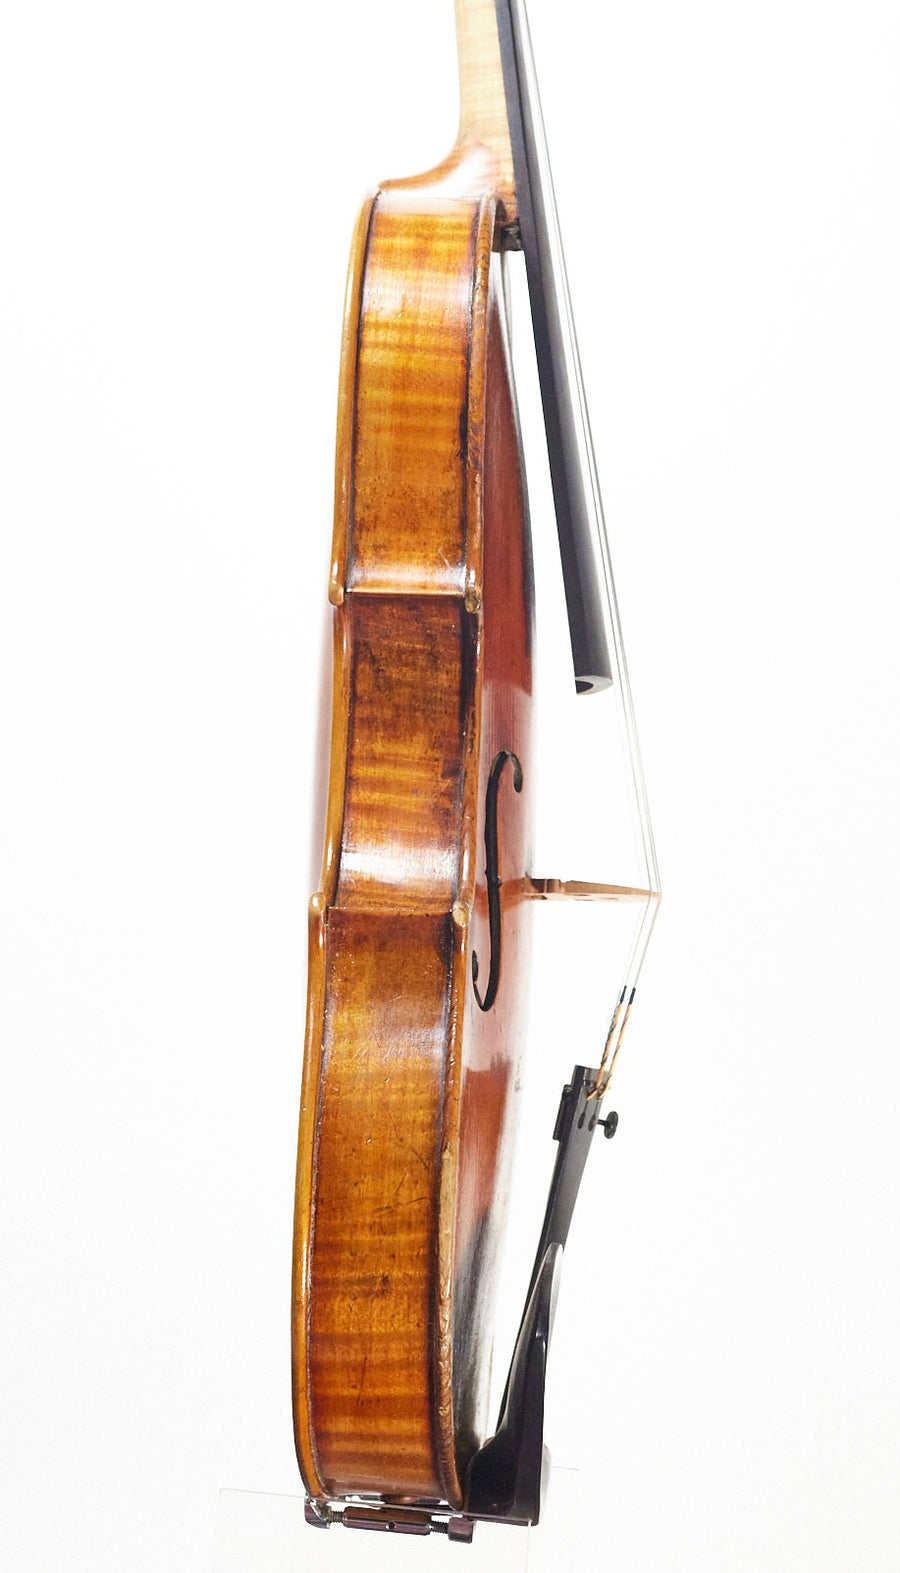 A Well Preserved Violin By Jacques Barbe In Mirecourt, C. 1840.